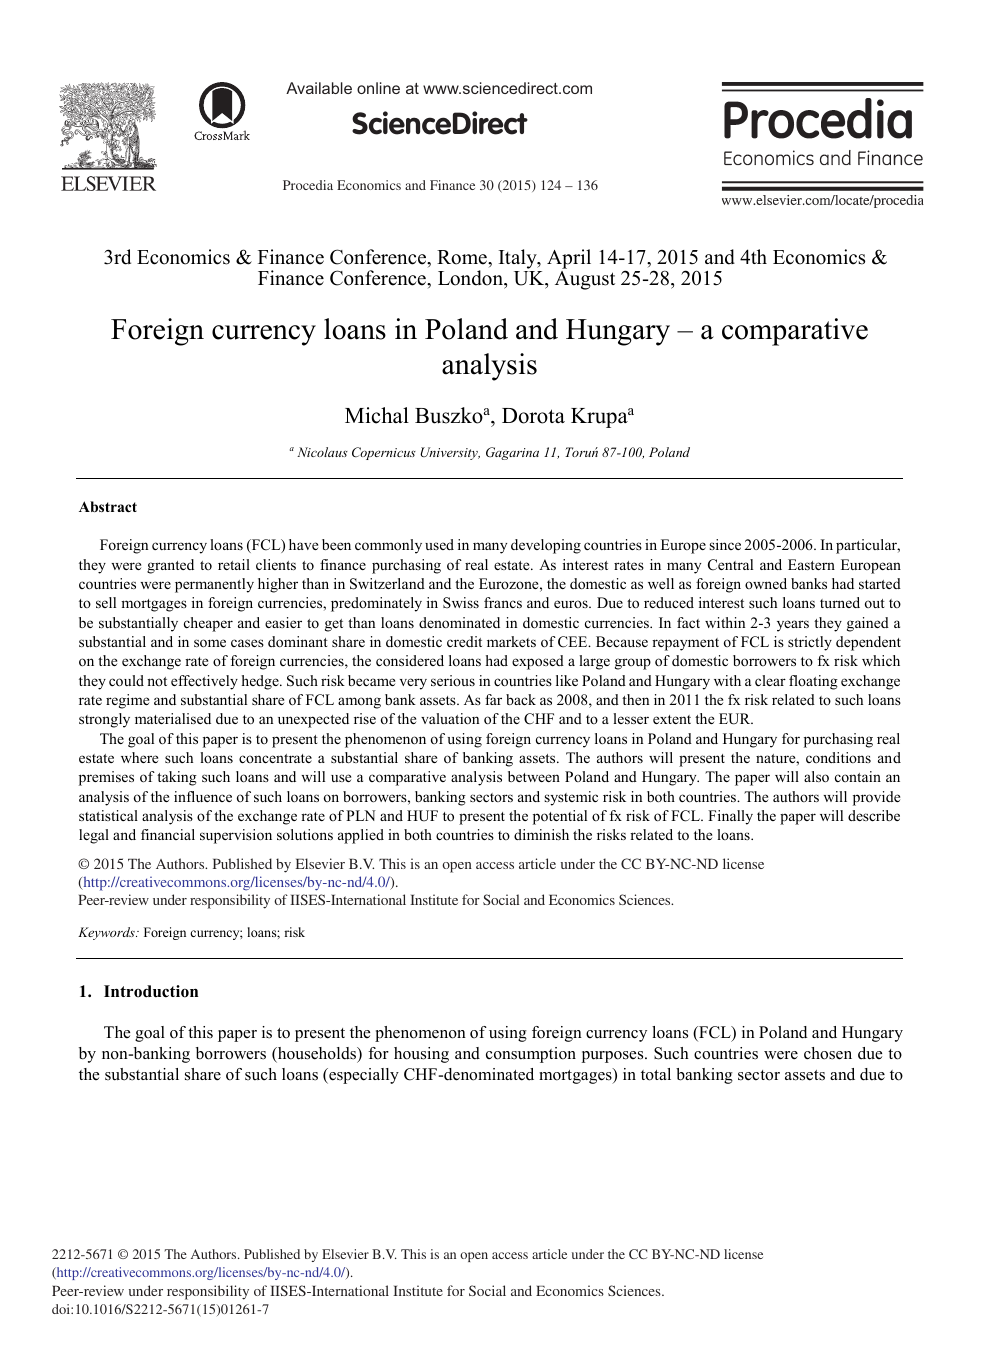 Foreign Currency Loans In Poland And Hungary A Comparative